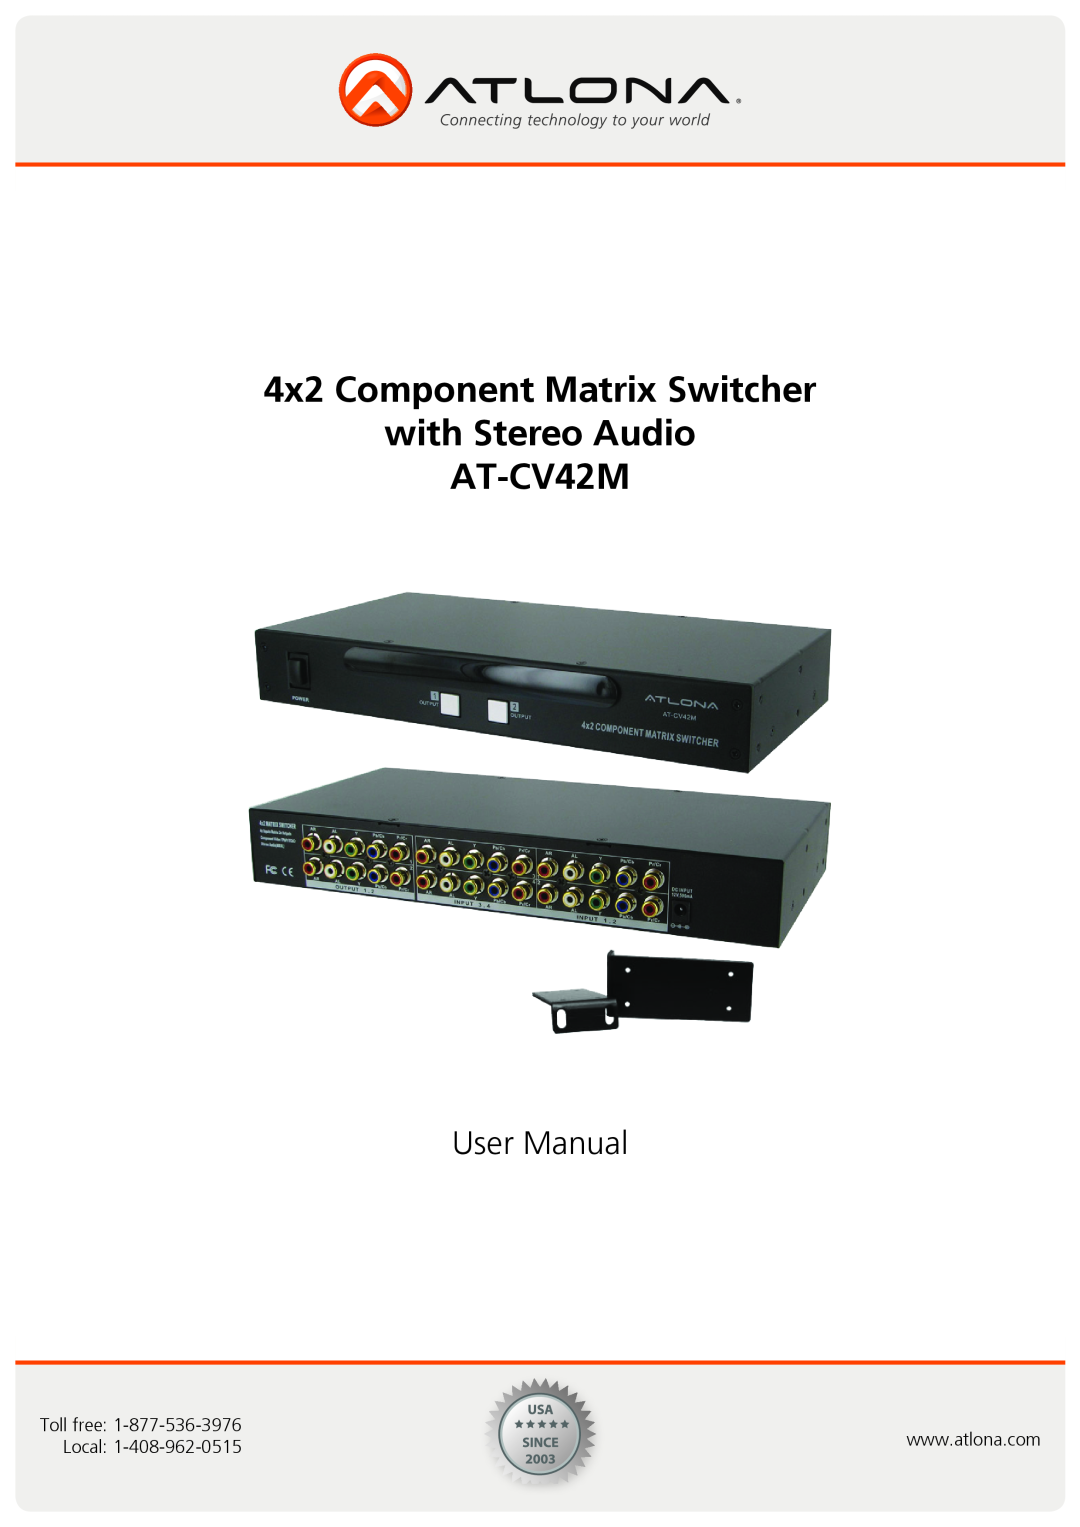 Atlona AT-CV42M user manual 4x2 Component Matrix Switcher with Stereo Audio, Toll free, Local 